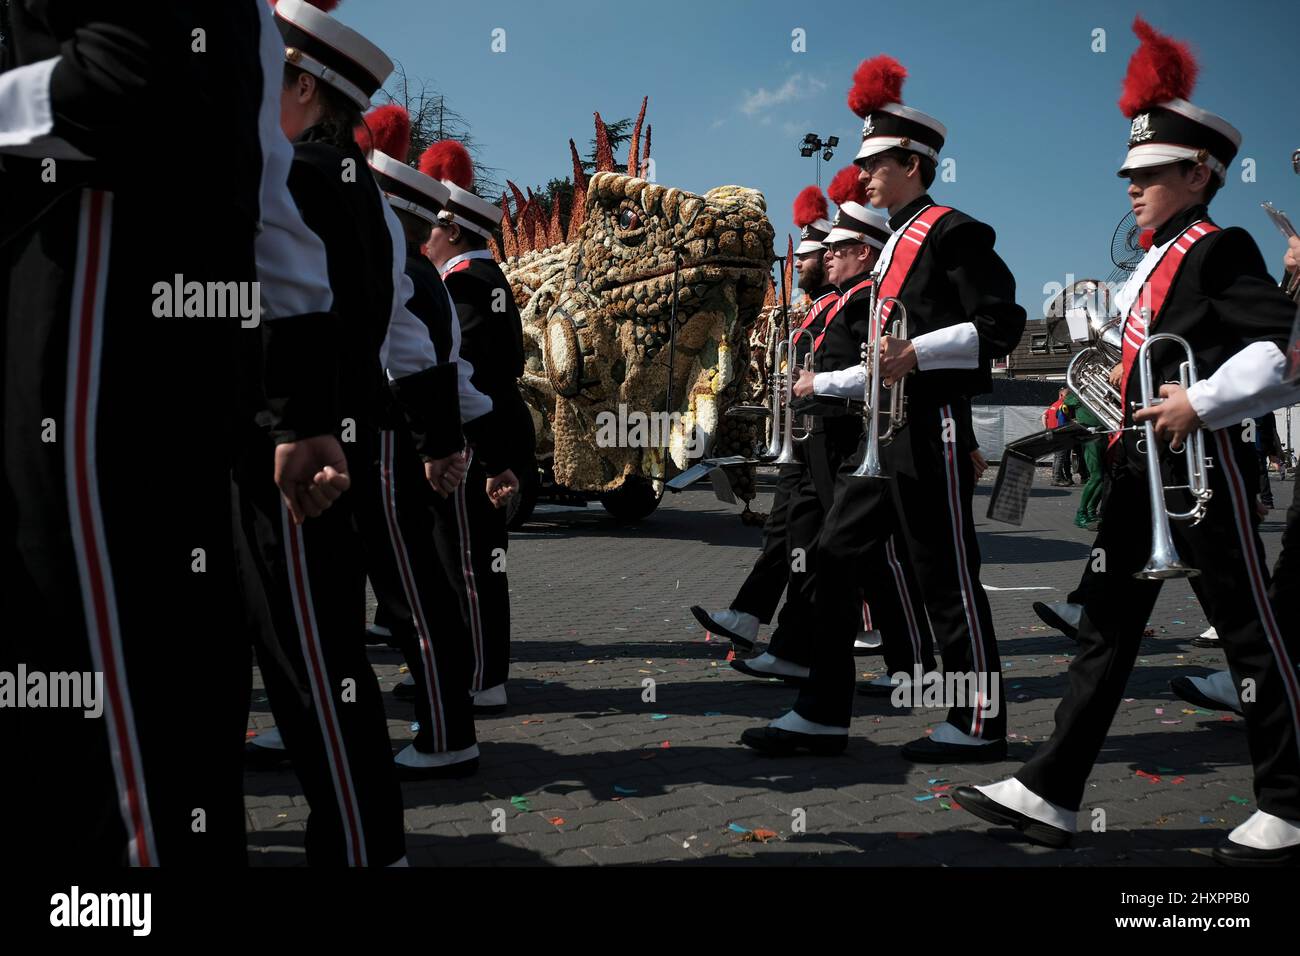 Several music bands take part in the parade Stock Photo